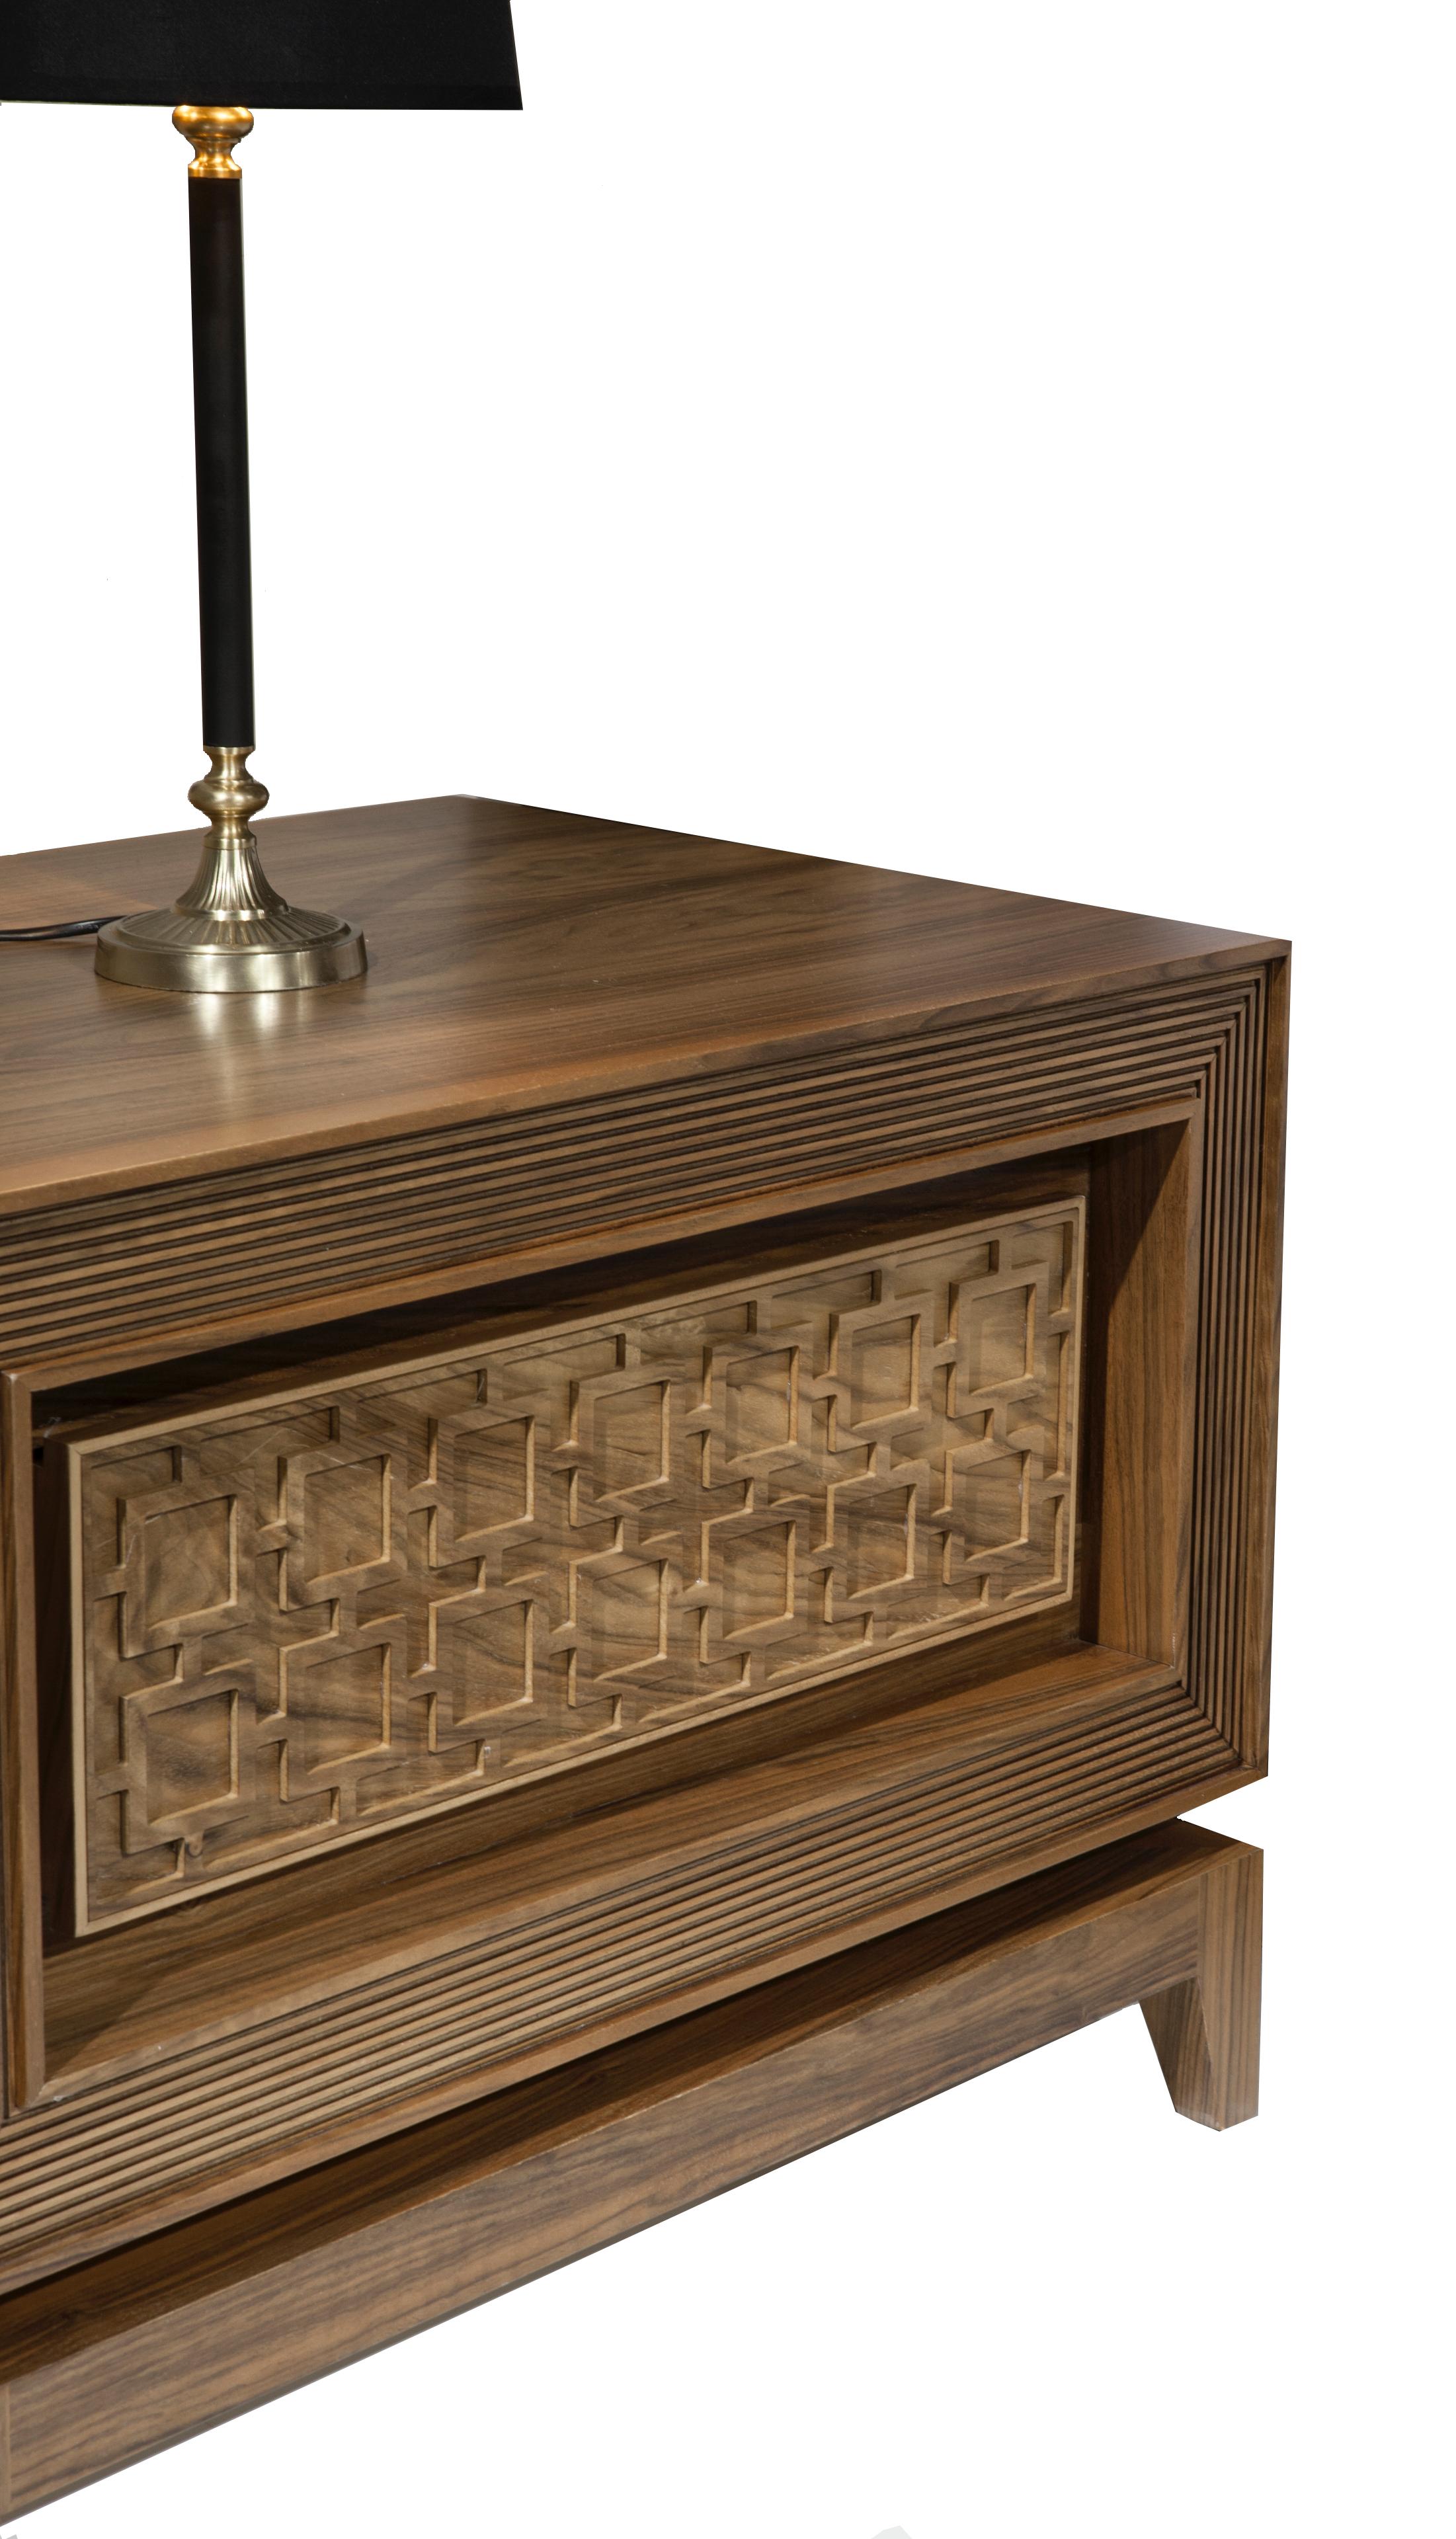 The carving techniques and intricate details of The Harem Nightstand are a reflection of Sisli’s rich heritage and dedication to craftsmanship. Make it modern in lacquer!